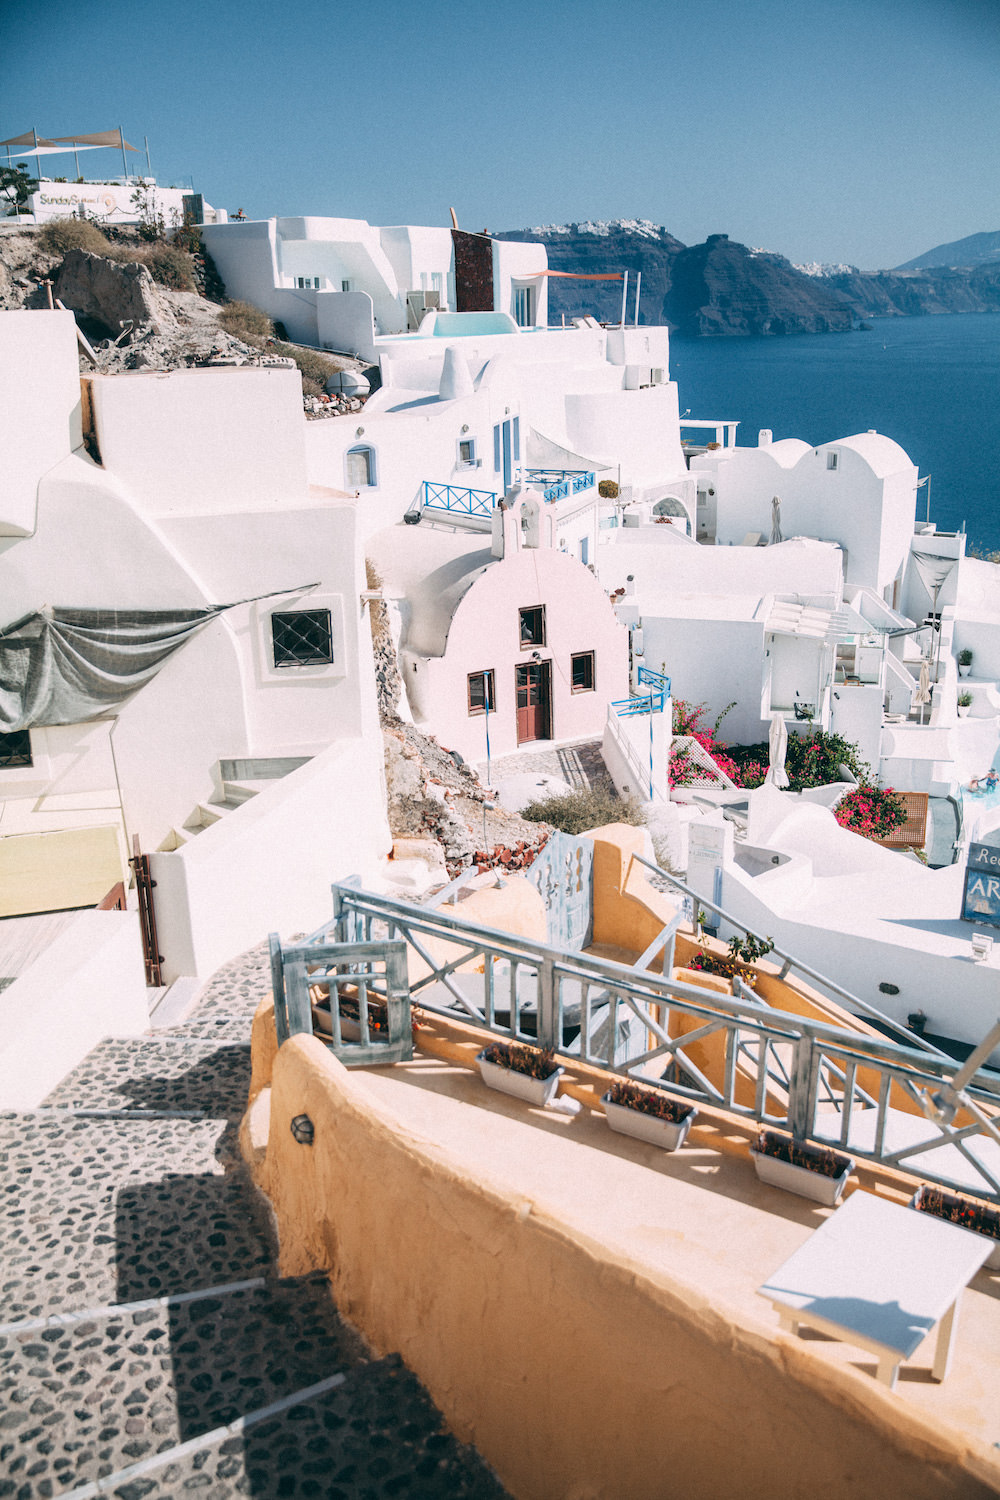 Dash of Darling shares her travels from Oia, Santorini Greece with Royal Caribbean Cruises.